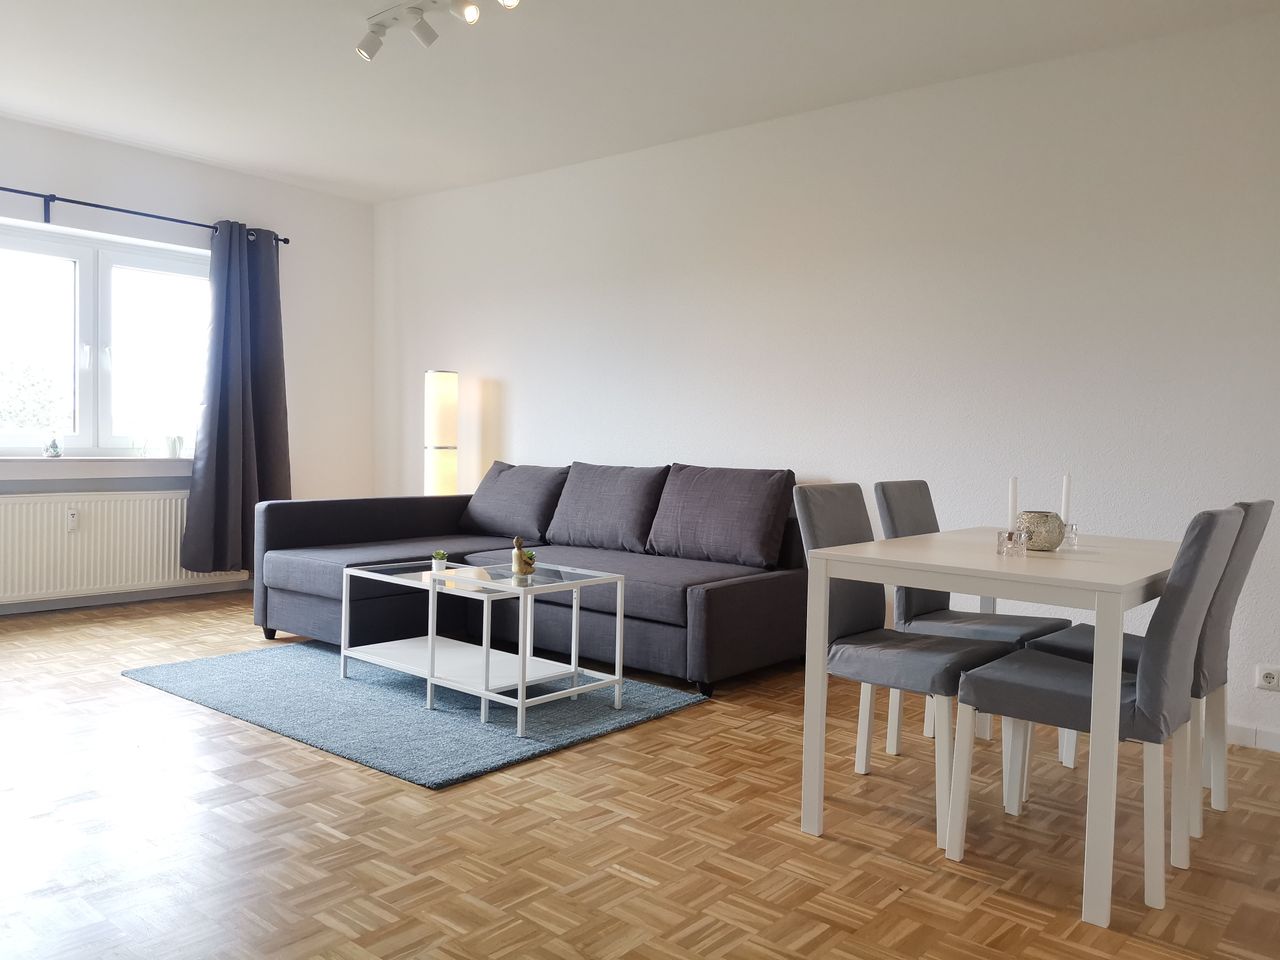 Comfortable 2-room apartment with new fitted kitchen, balcony & fantastic view in Rodgau